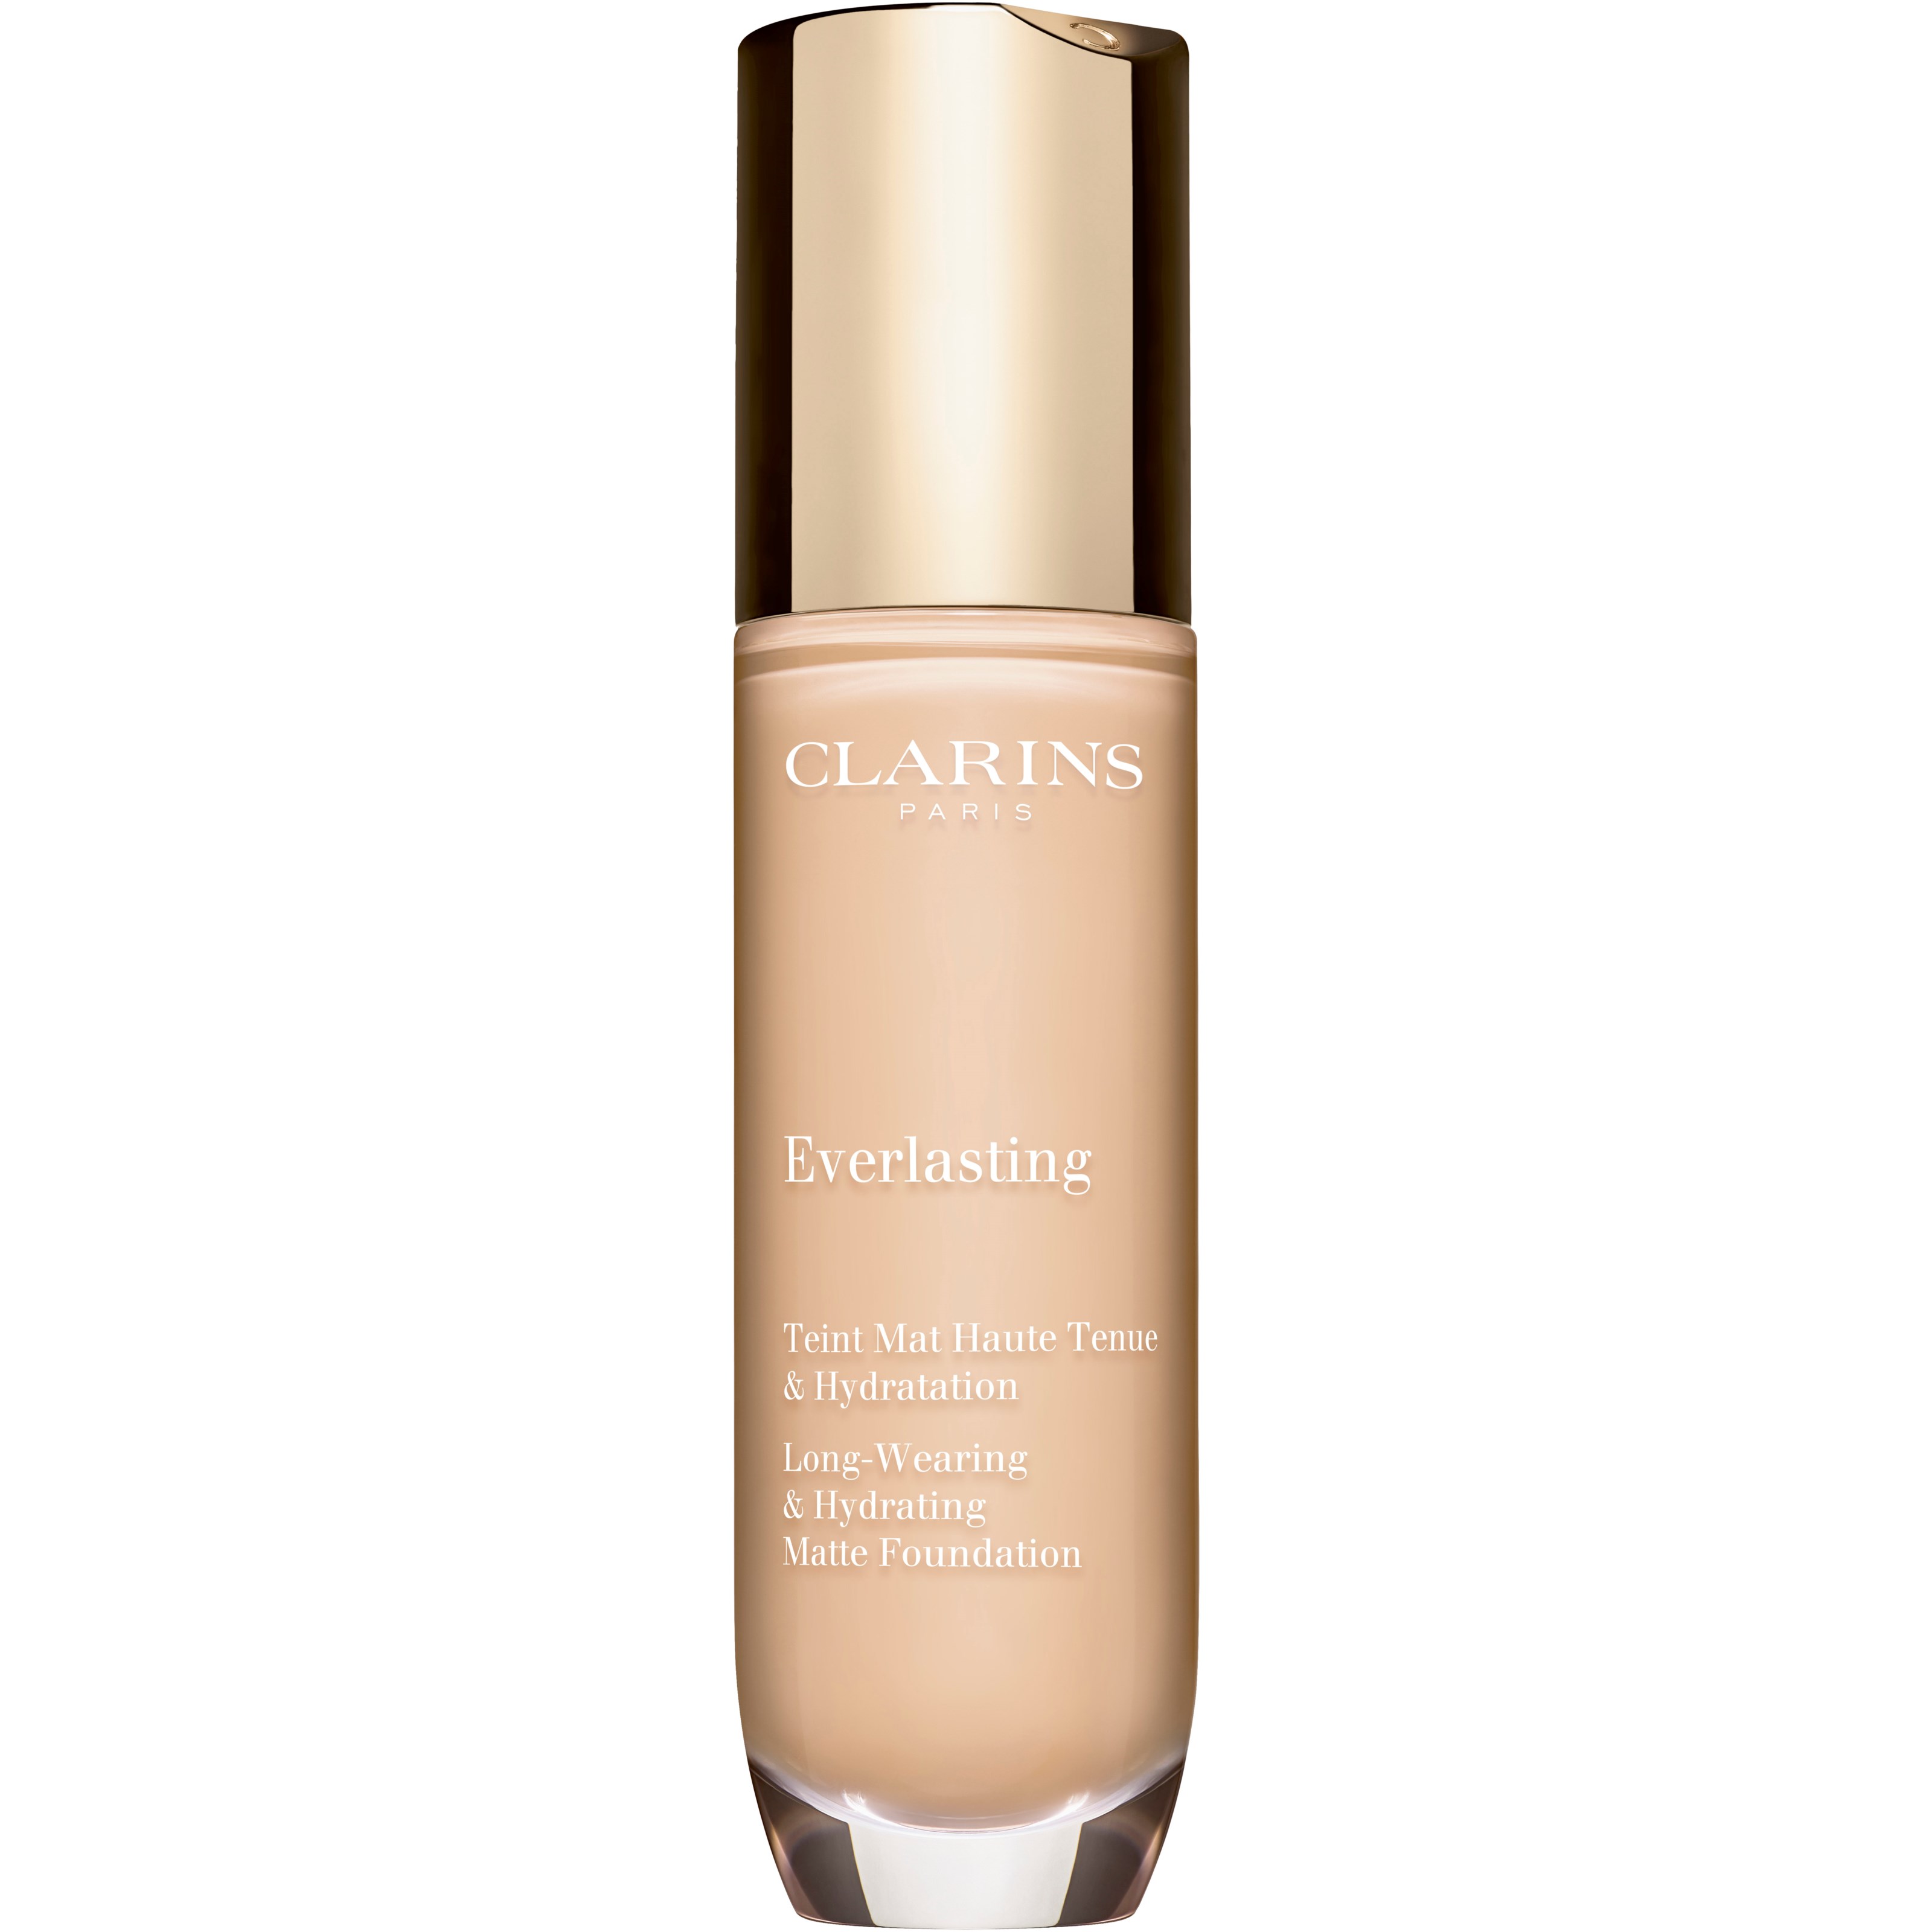 Clarins     Everlasting Long-Wearing & Hydrating Matte Foundation 100.